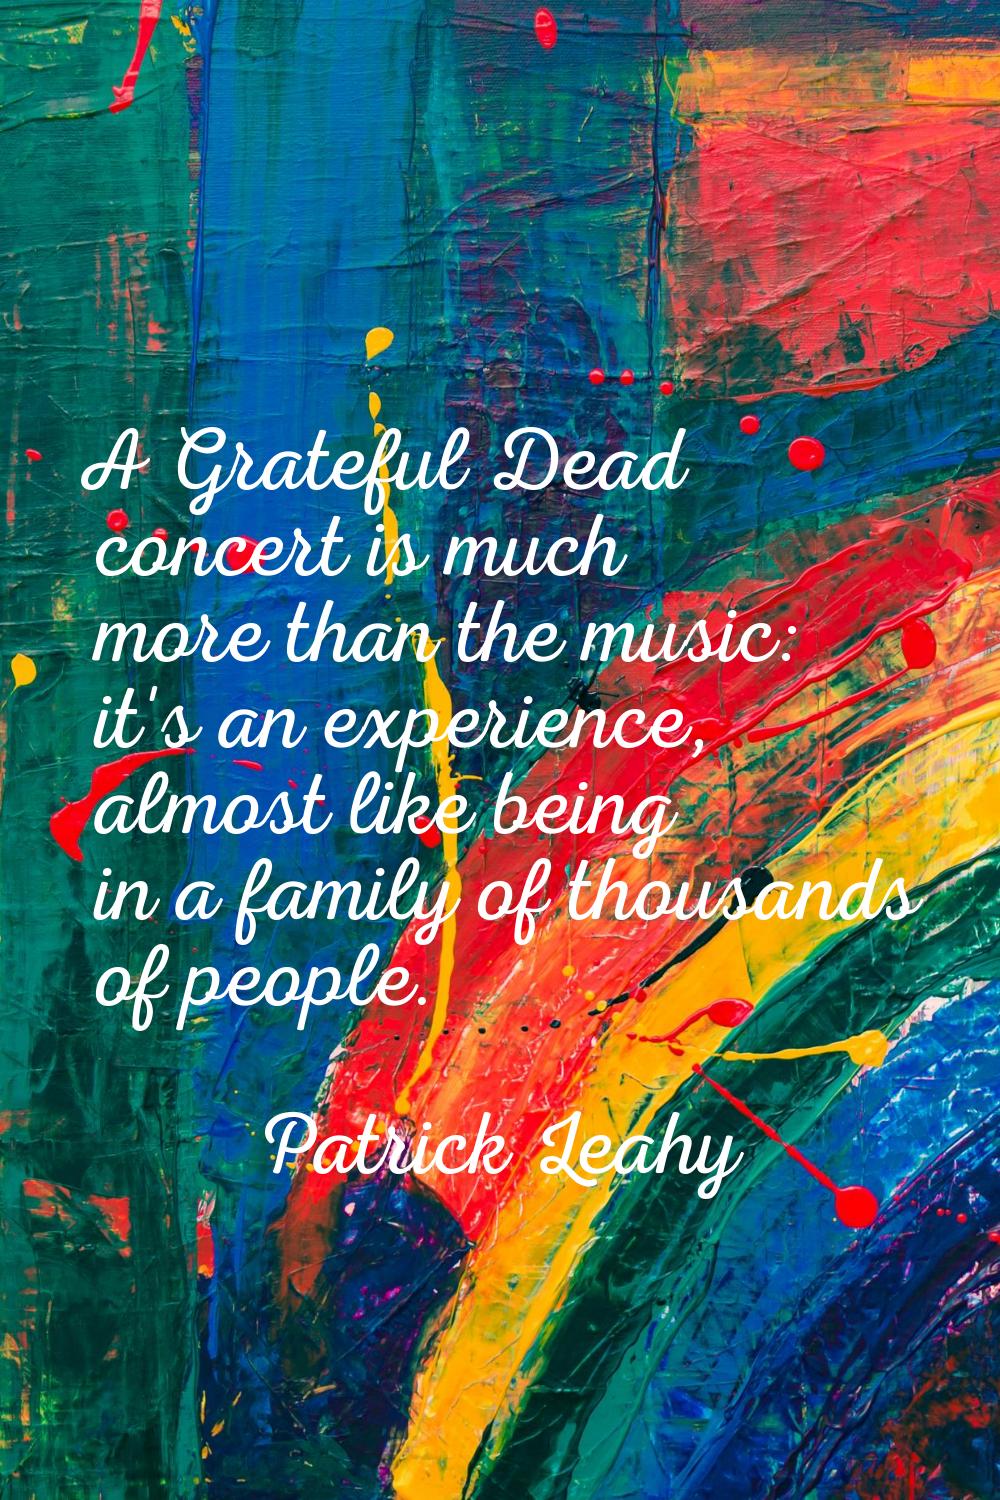 A Grateful Dead concert is much more than the music: it's an experience, almost like being in a fam